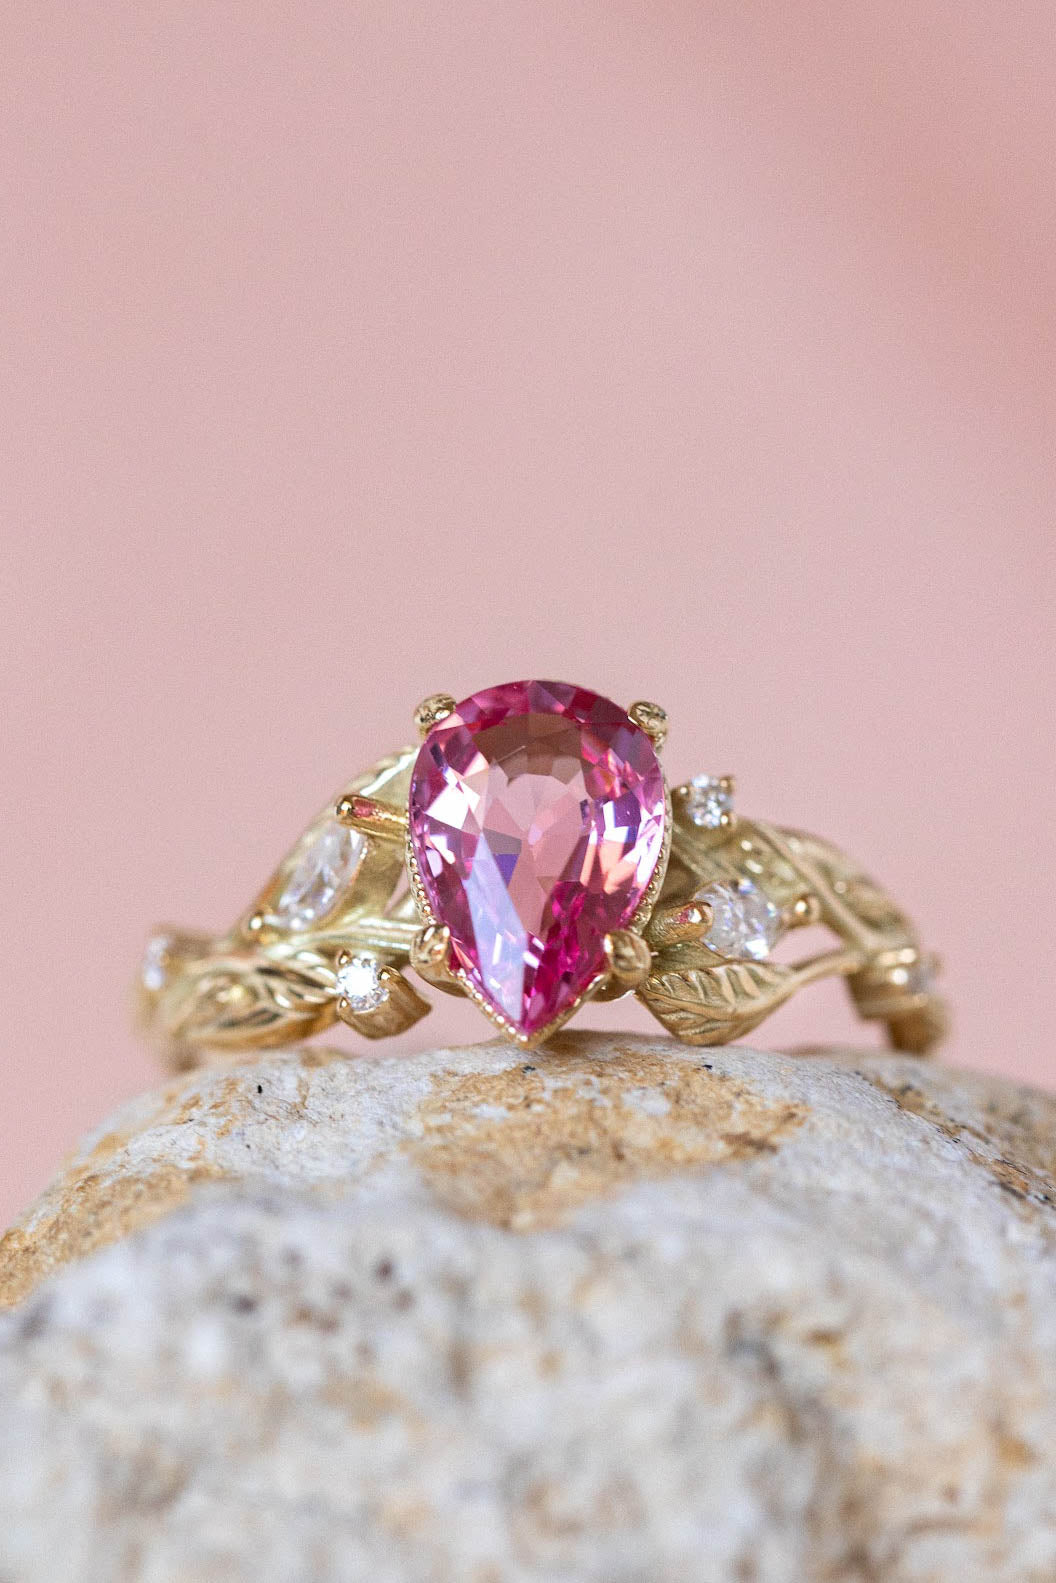 READY TO SHIP: Patricia ring in 14K yellow gold, natural pink spinel pear cut 8x6 mm, accent moissanites, AVAILABLE RING SIZES: 6-8US - Eden Garden Jewelry™